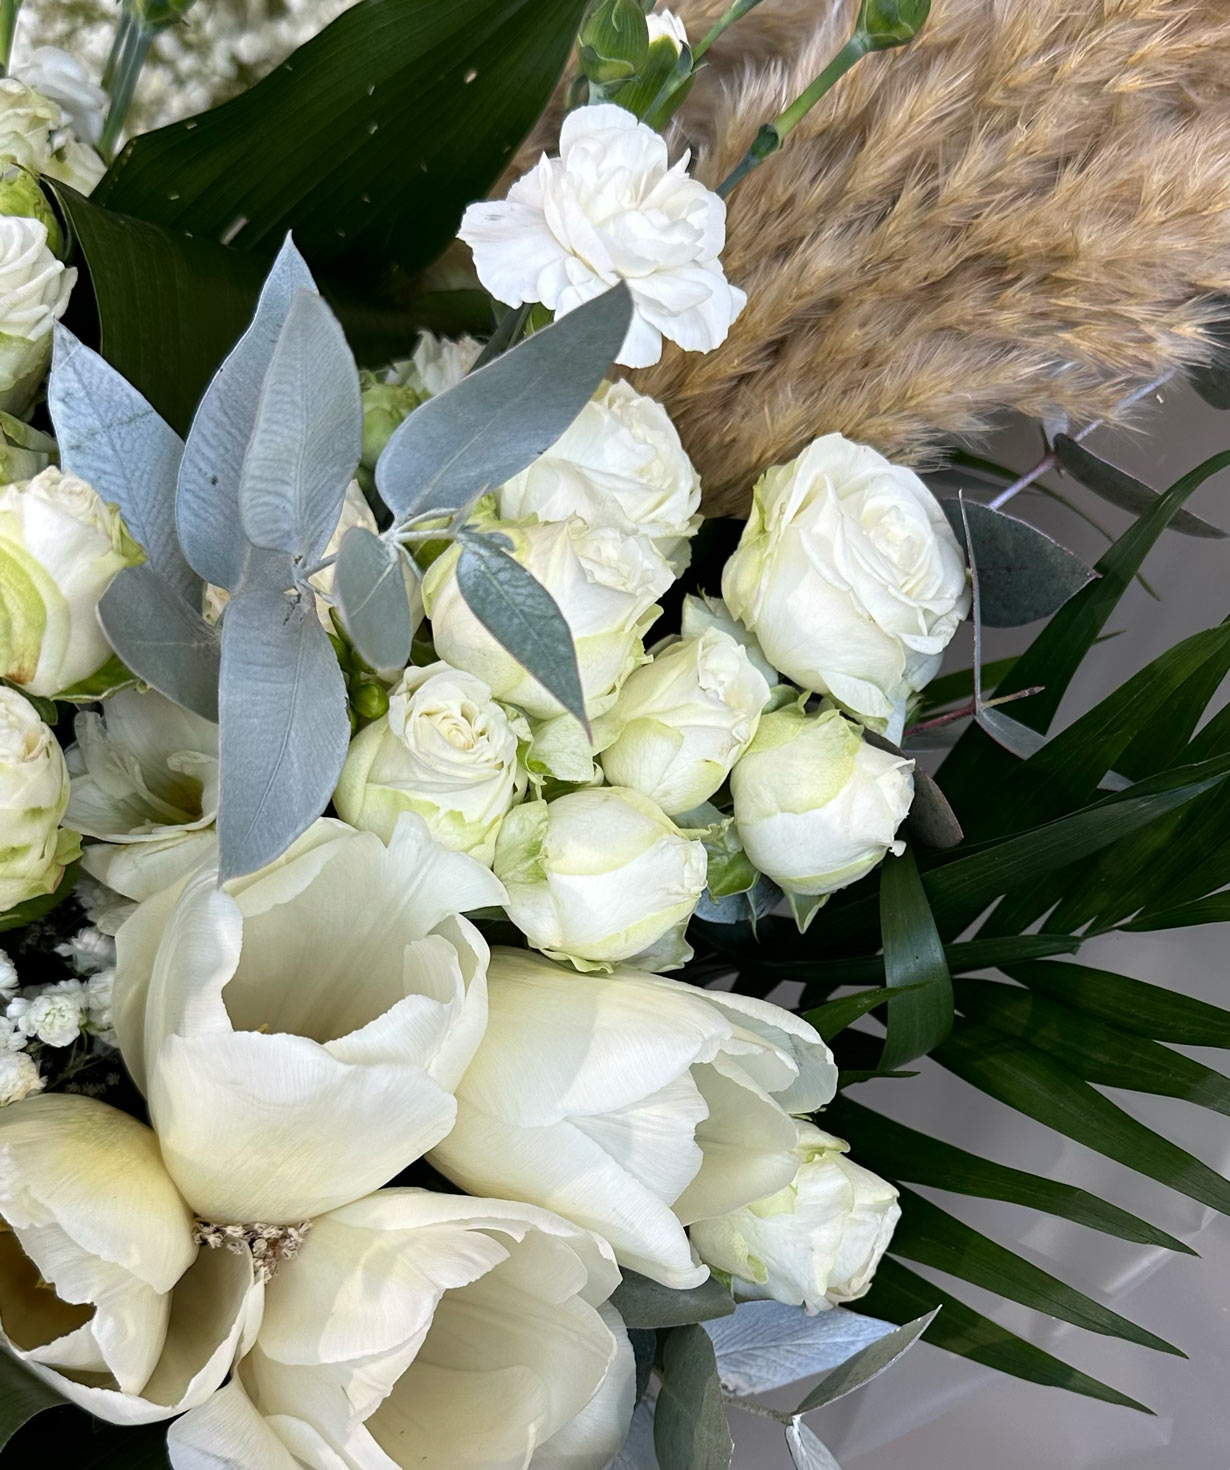 Bouquet «Runne» with spray roses and tulips